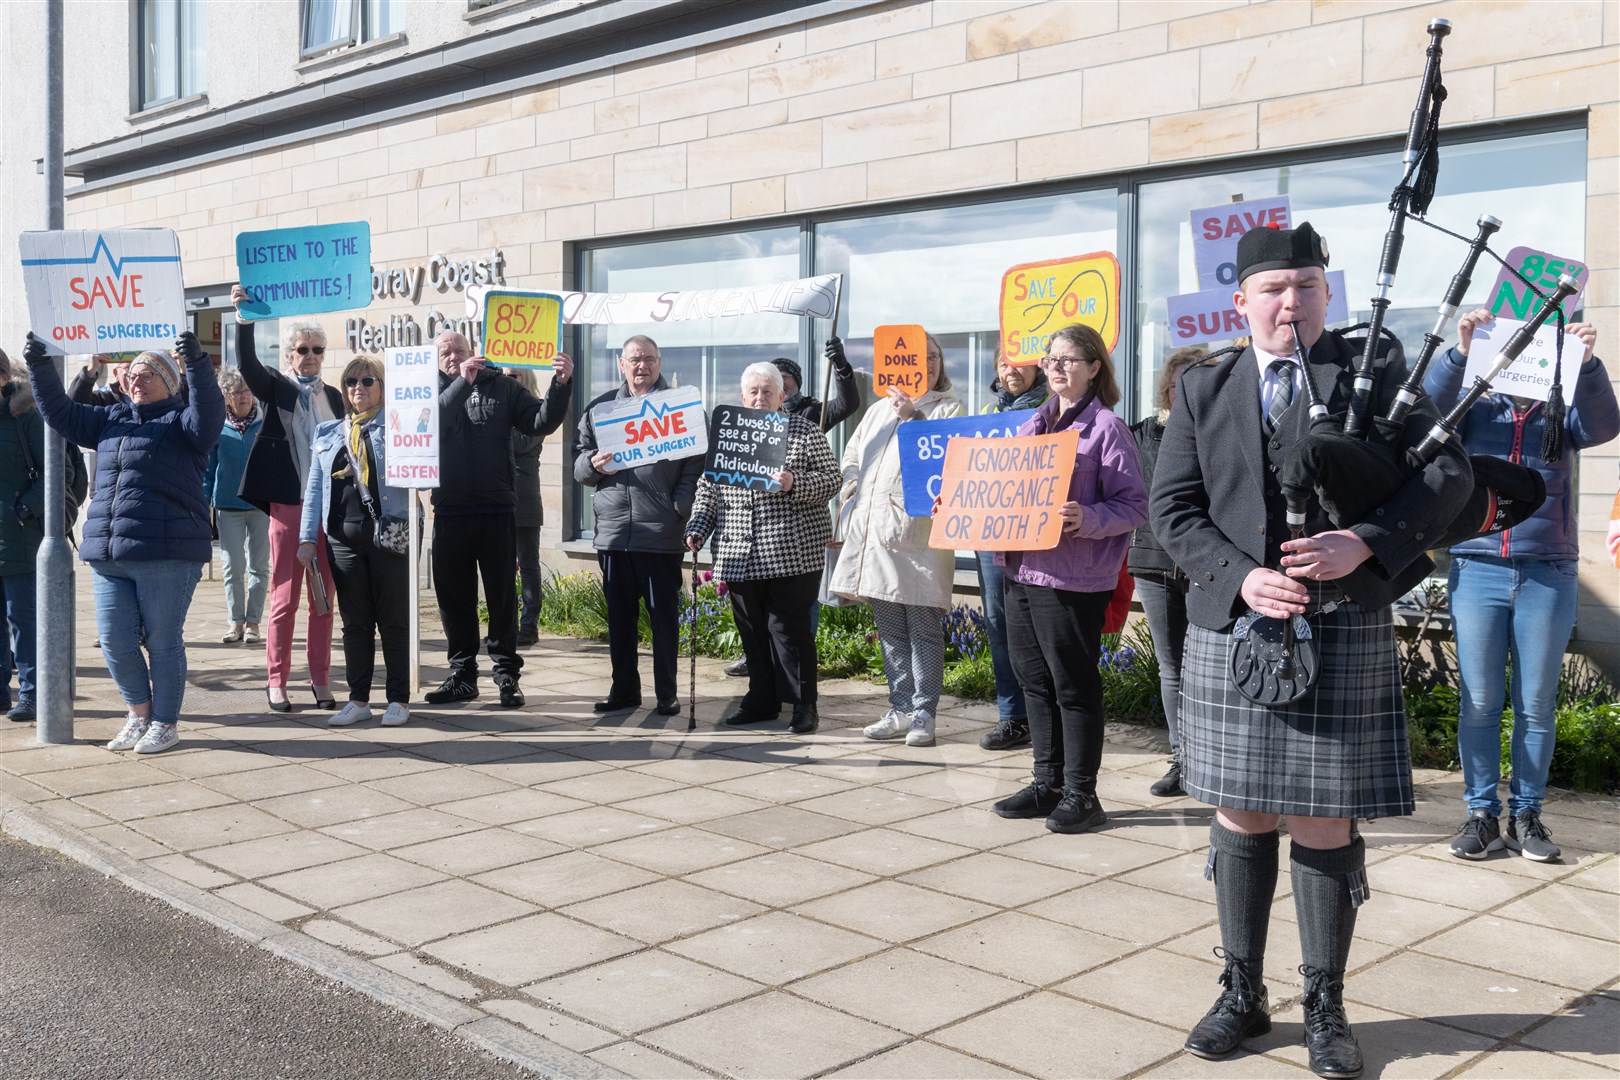 Campaigners protested outside the Moray Coast Health Centre in Lossiemouth to save the Hopeman and Burghead GP surgeries. Picture: Beth Taylor